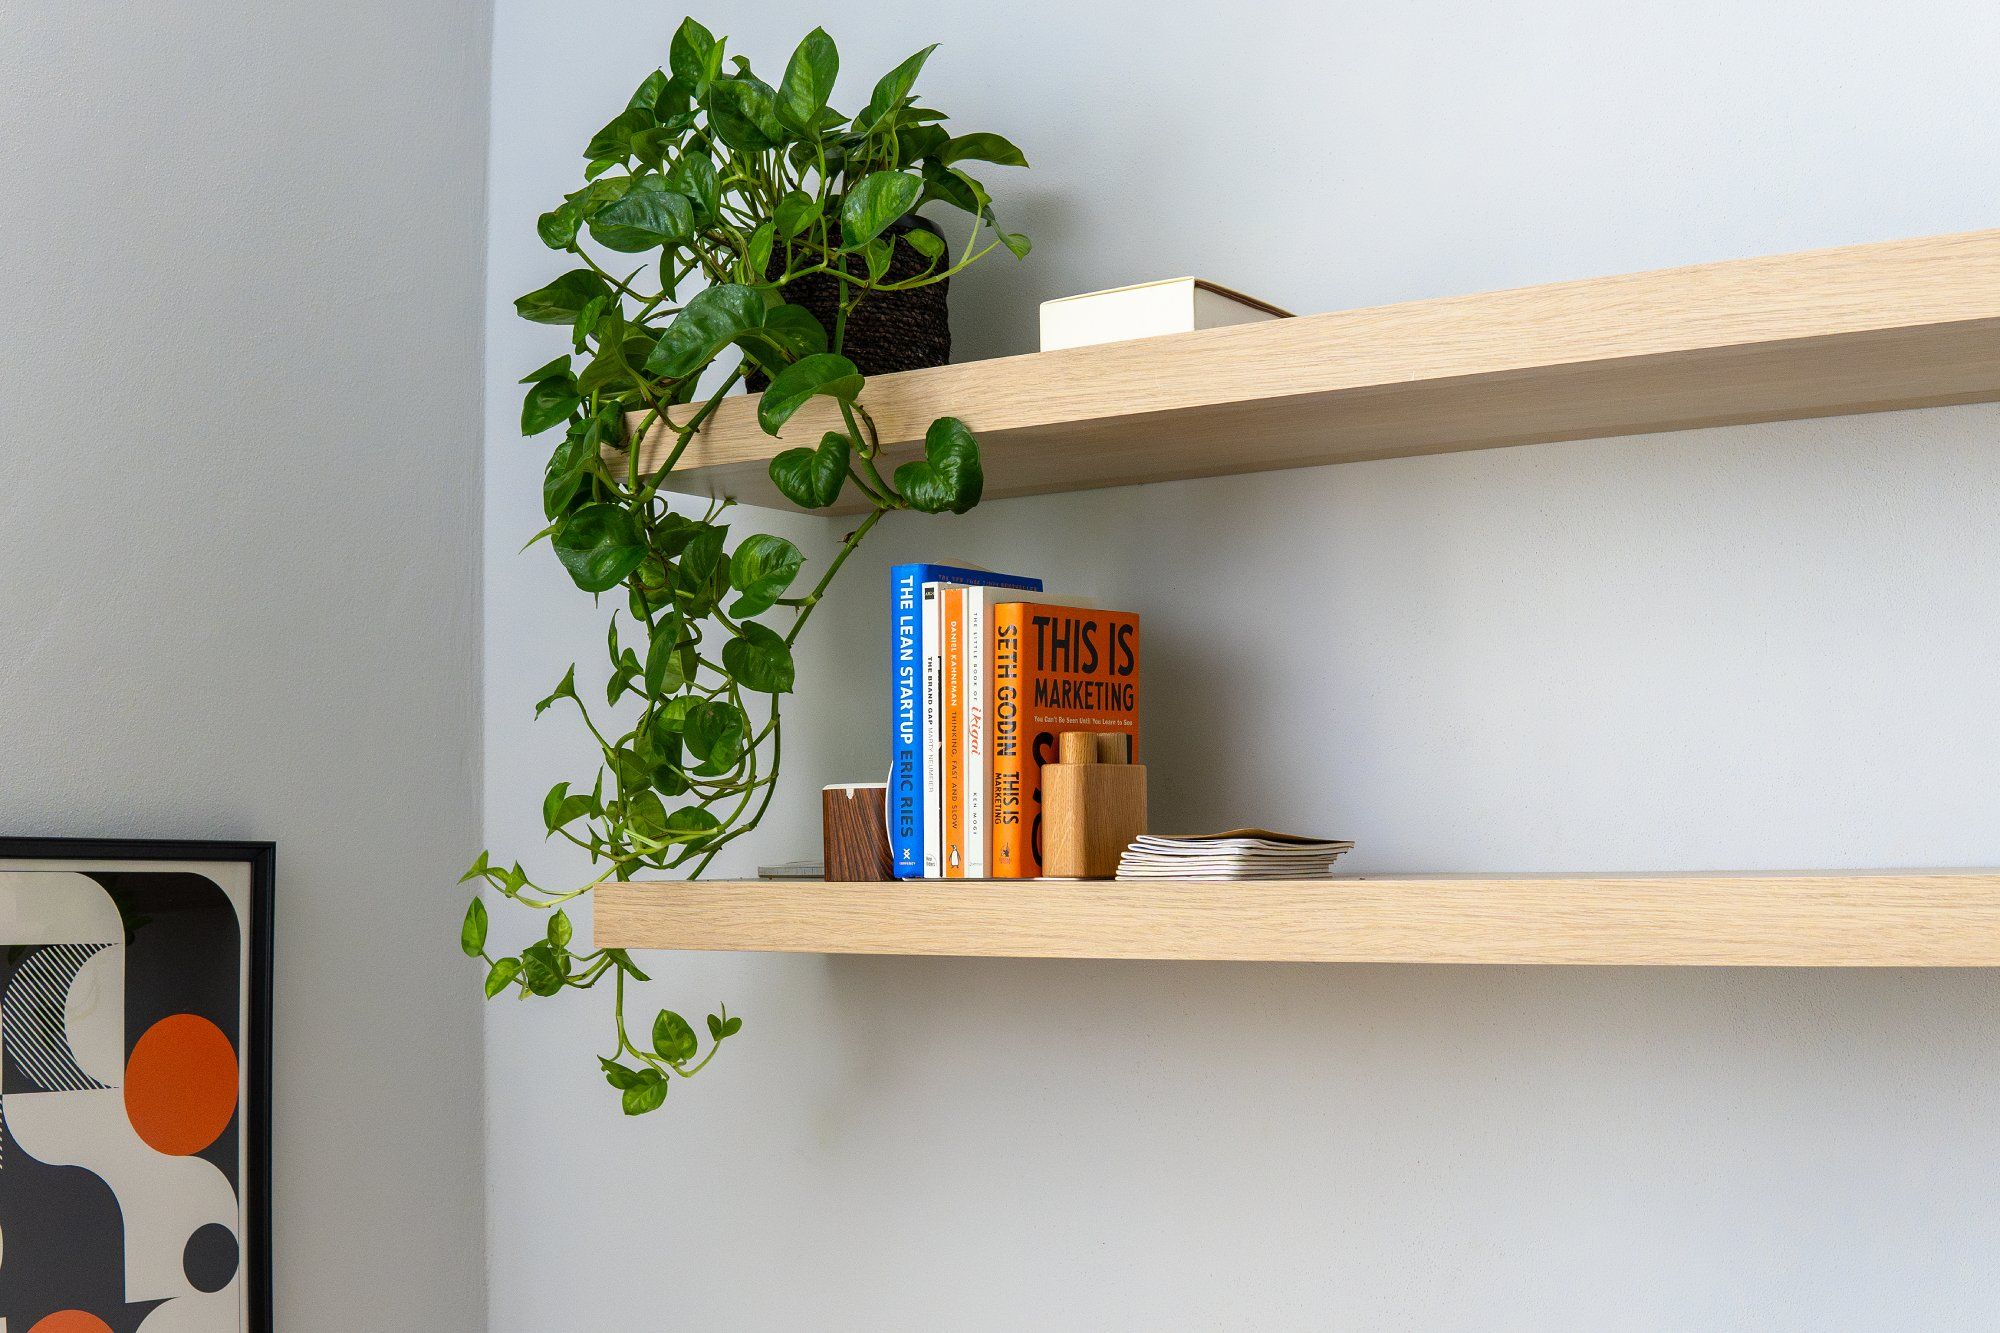 An ivy houseplant and five books on wall-mounted floating shelves